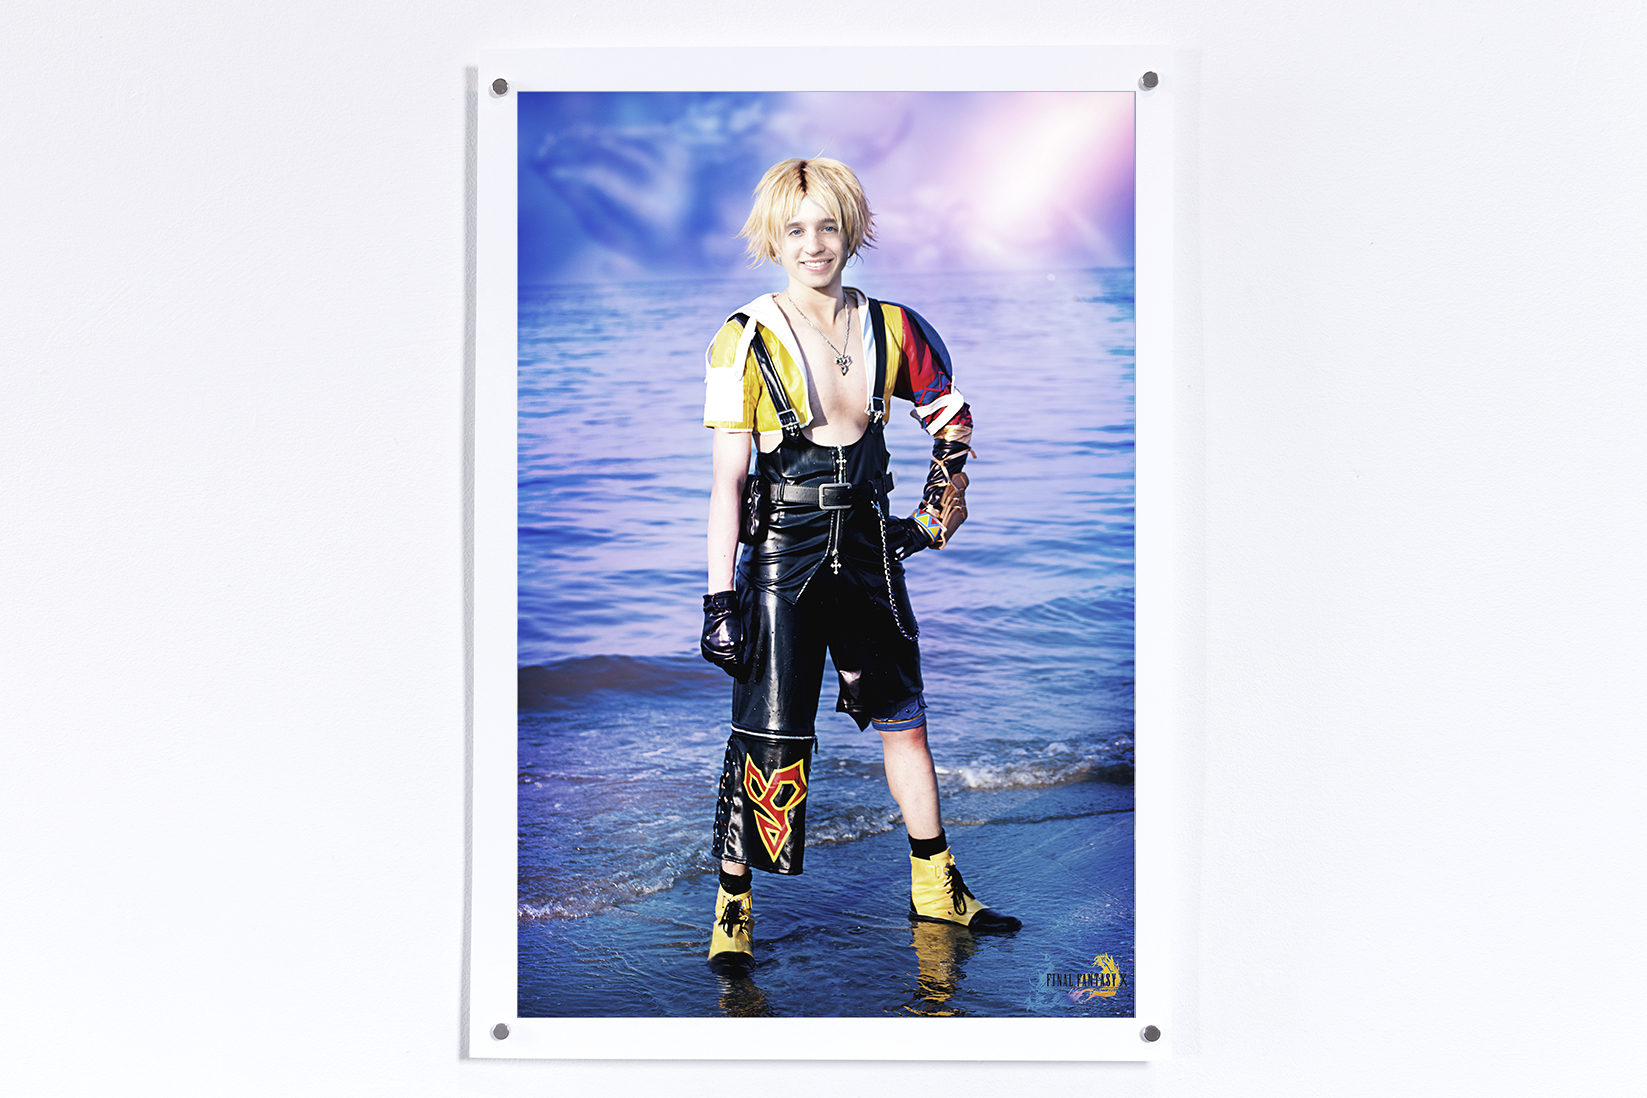 Print hung on a white wall of Tidus from Final Fantasy 10 on a beach with Jesse's face superimposed on the character